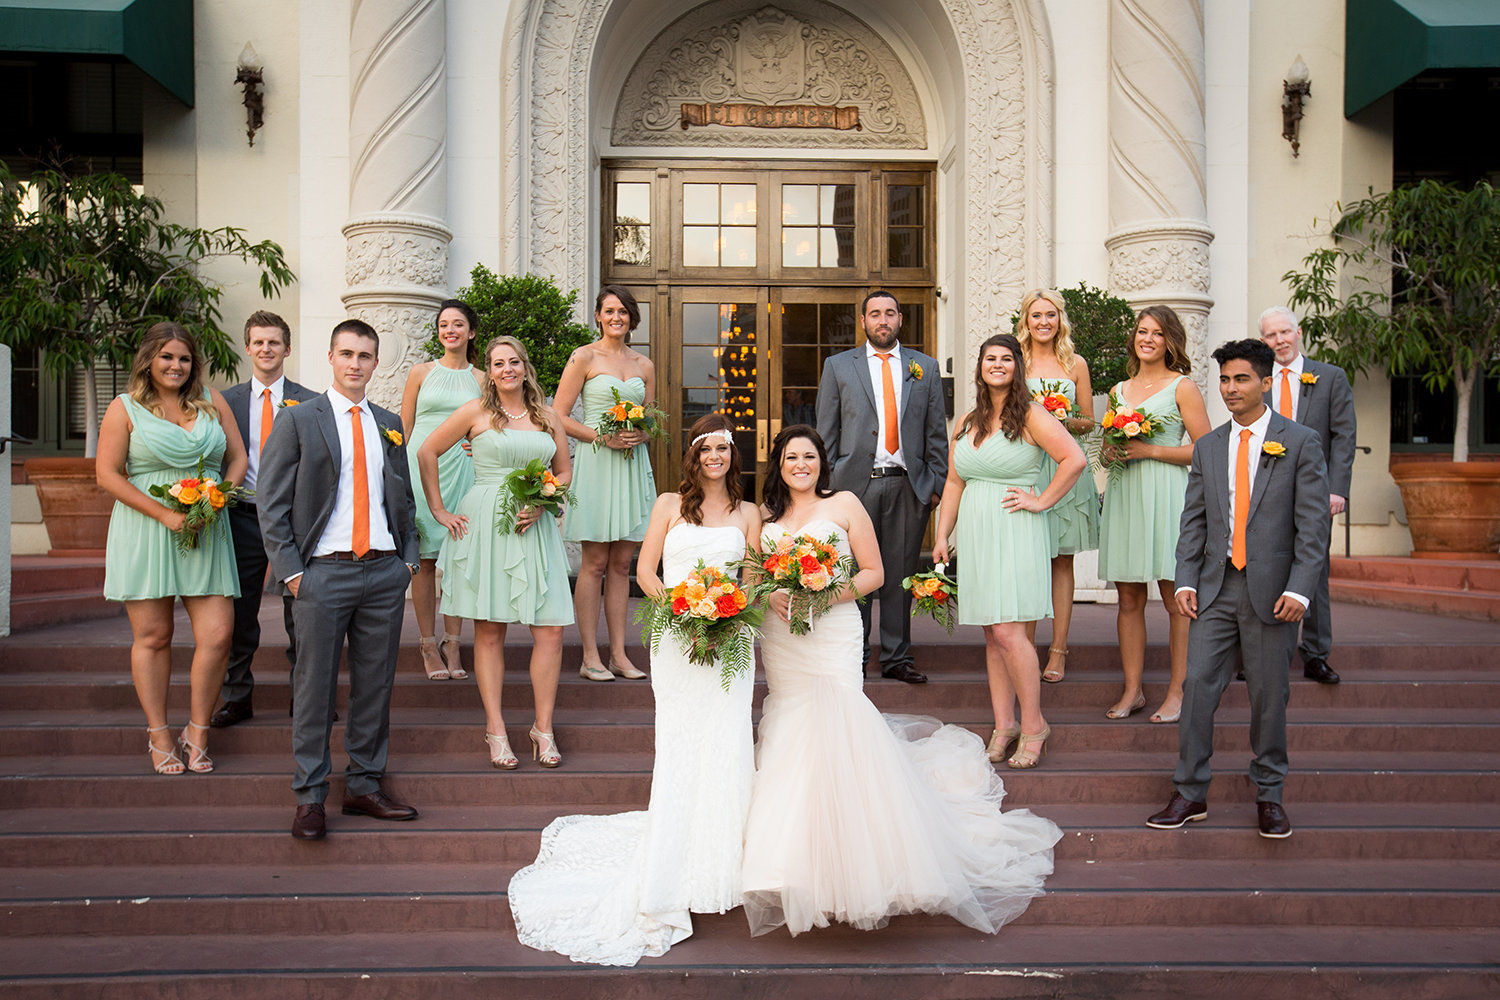 Modern Vogue styled wedding party photo